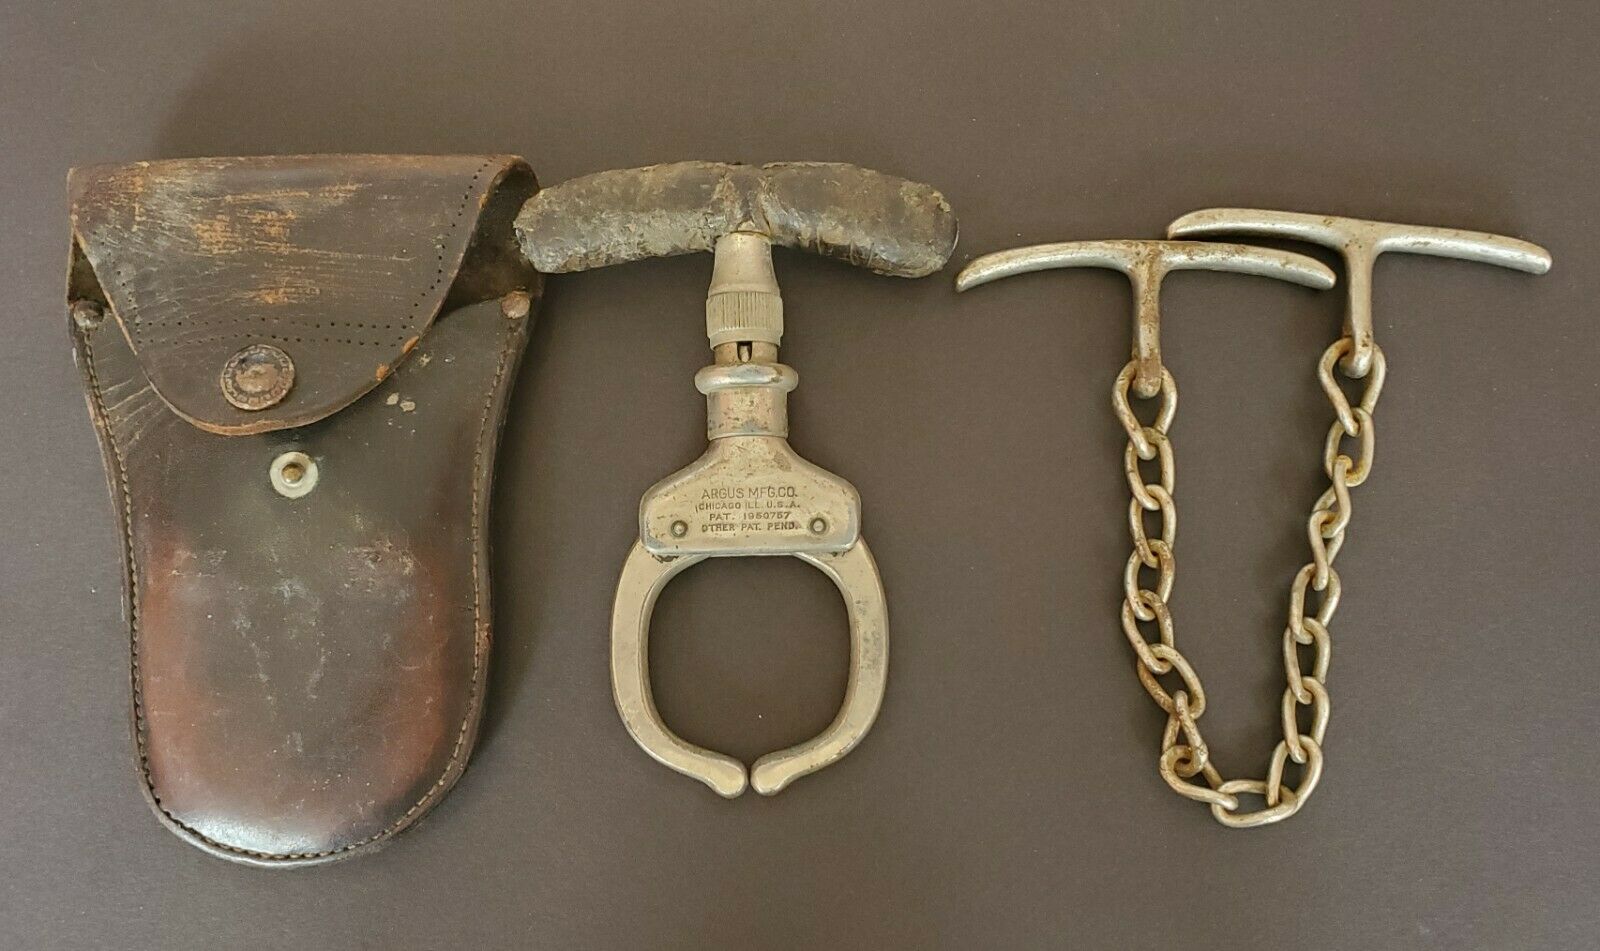 1930s Argus Mfg Iron Claw nipper and Chain Come along